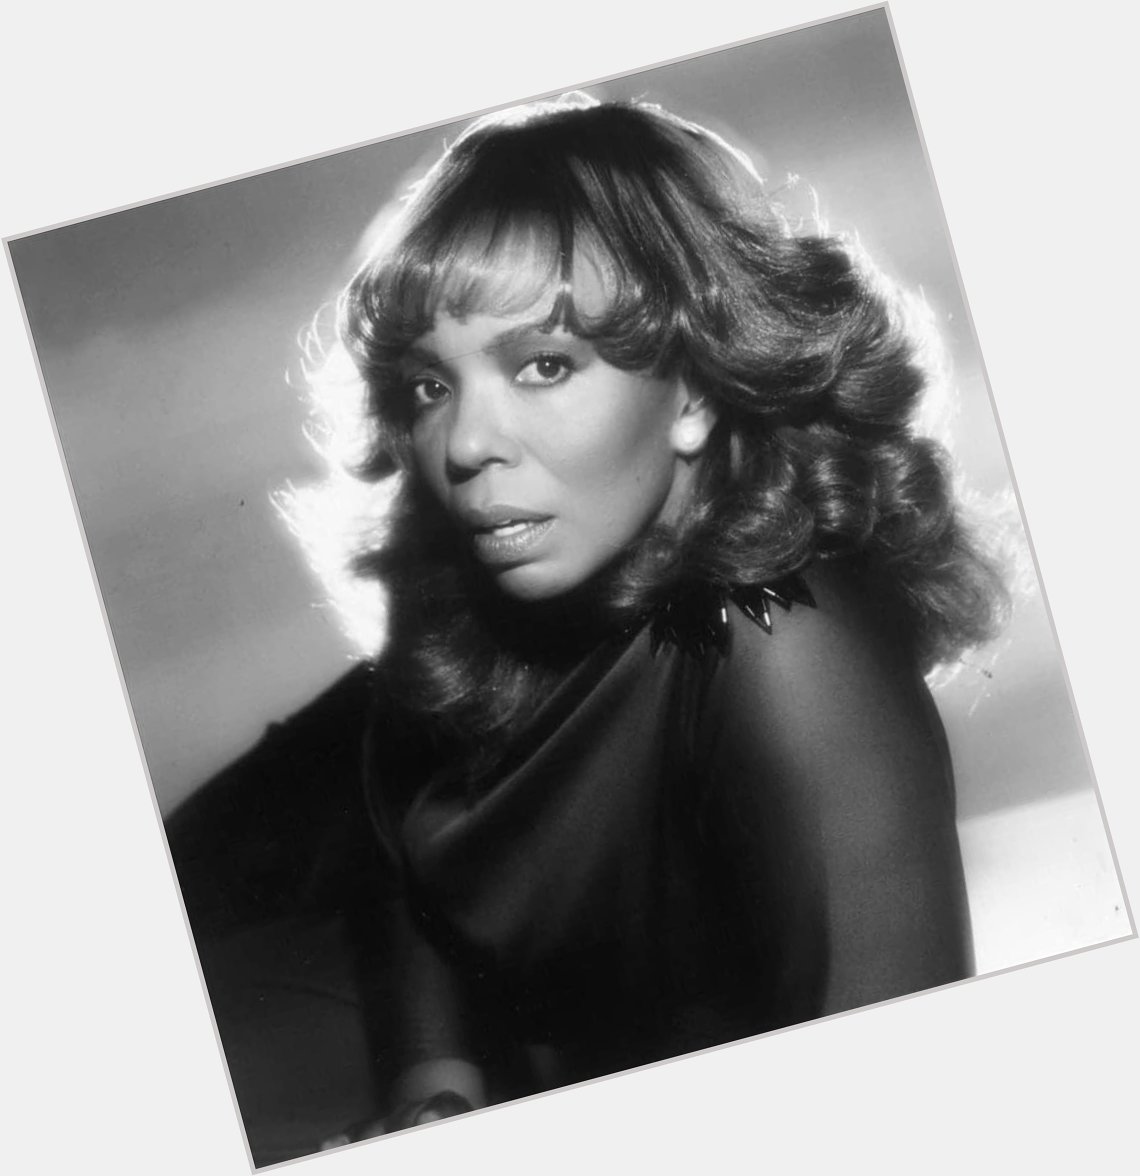 Wishing a Happy Heavenly 78th Birthday to Mary Wells!              